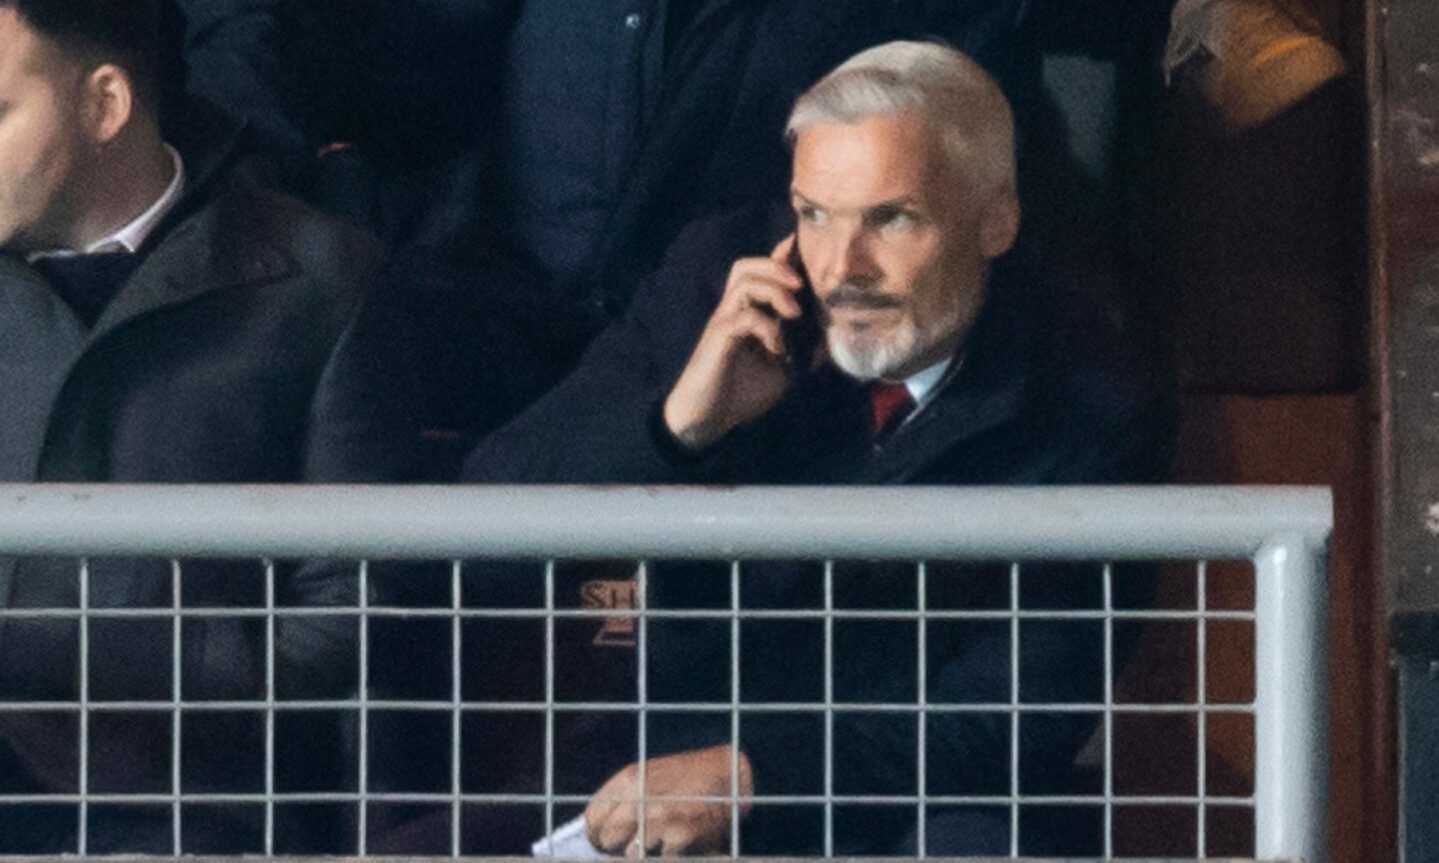 Aberdeen manager Jim Goodwin in the stands at Tannadice. Image: Stephen Dobson/ProSports/Shutterstock (13449053ci)